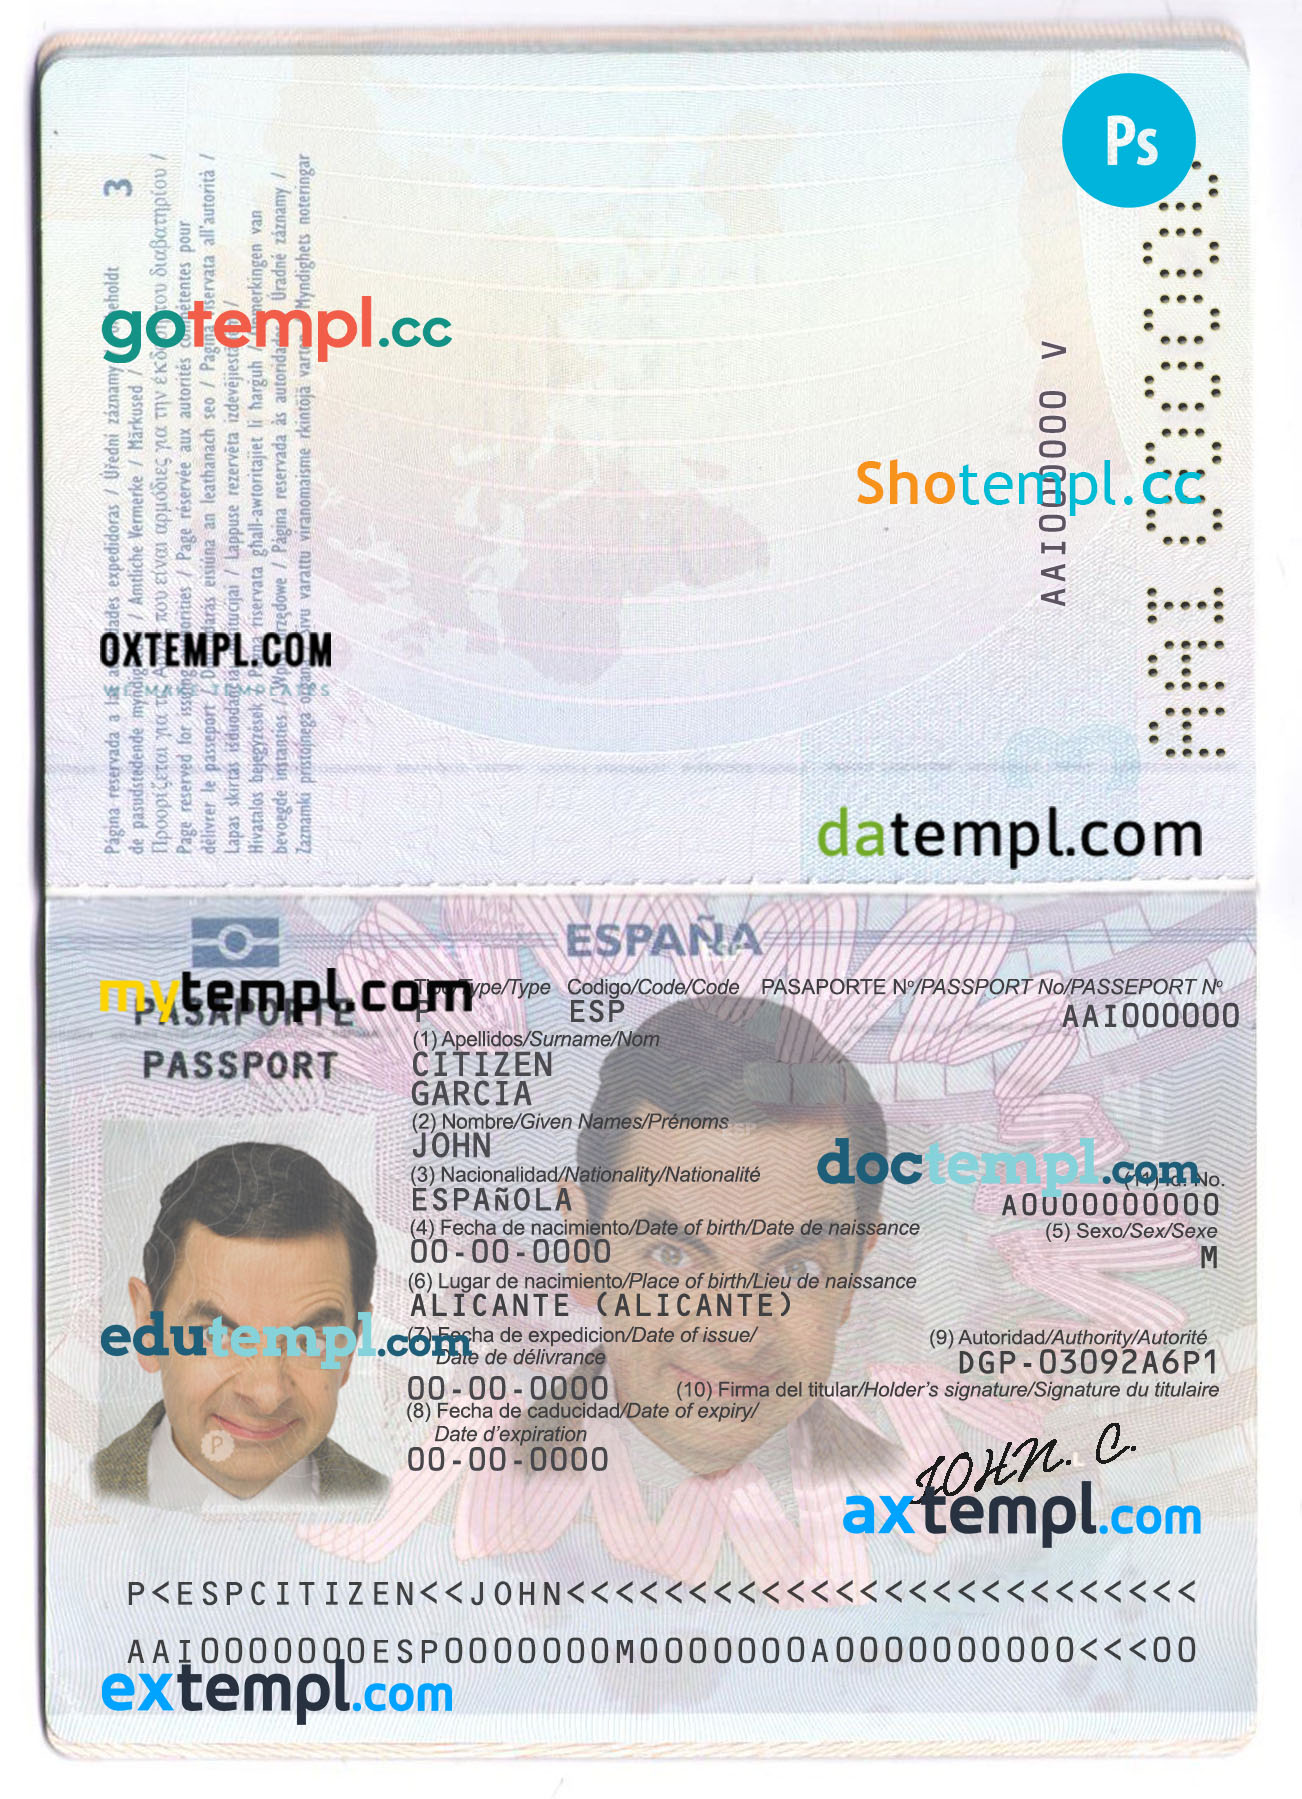 Spain passport PSD files, editable scan and photo-realistic look sample, 2 in 1